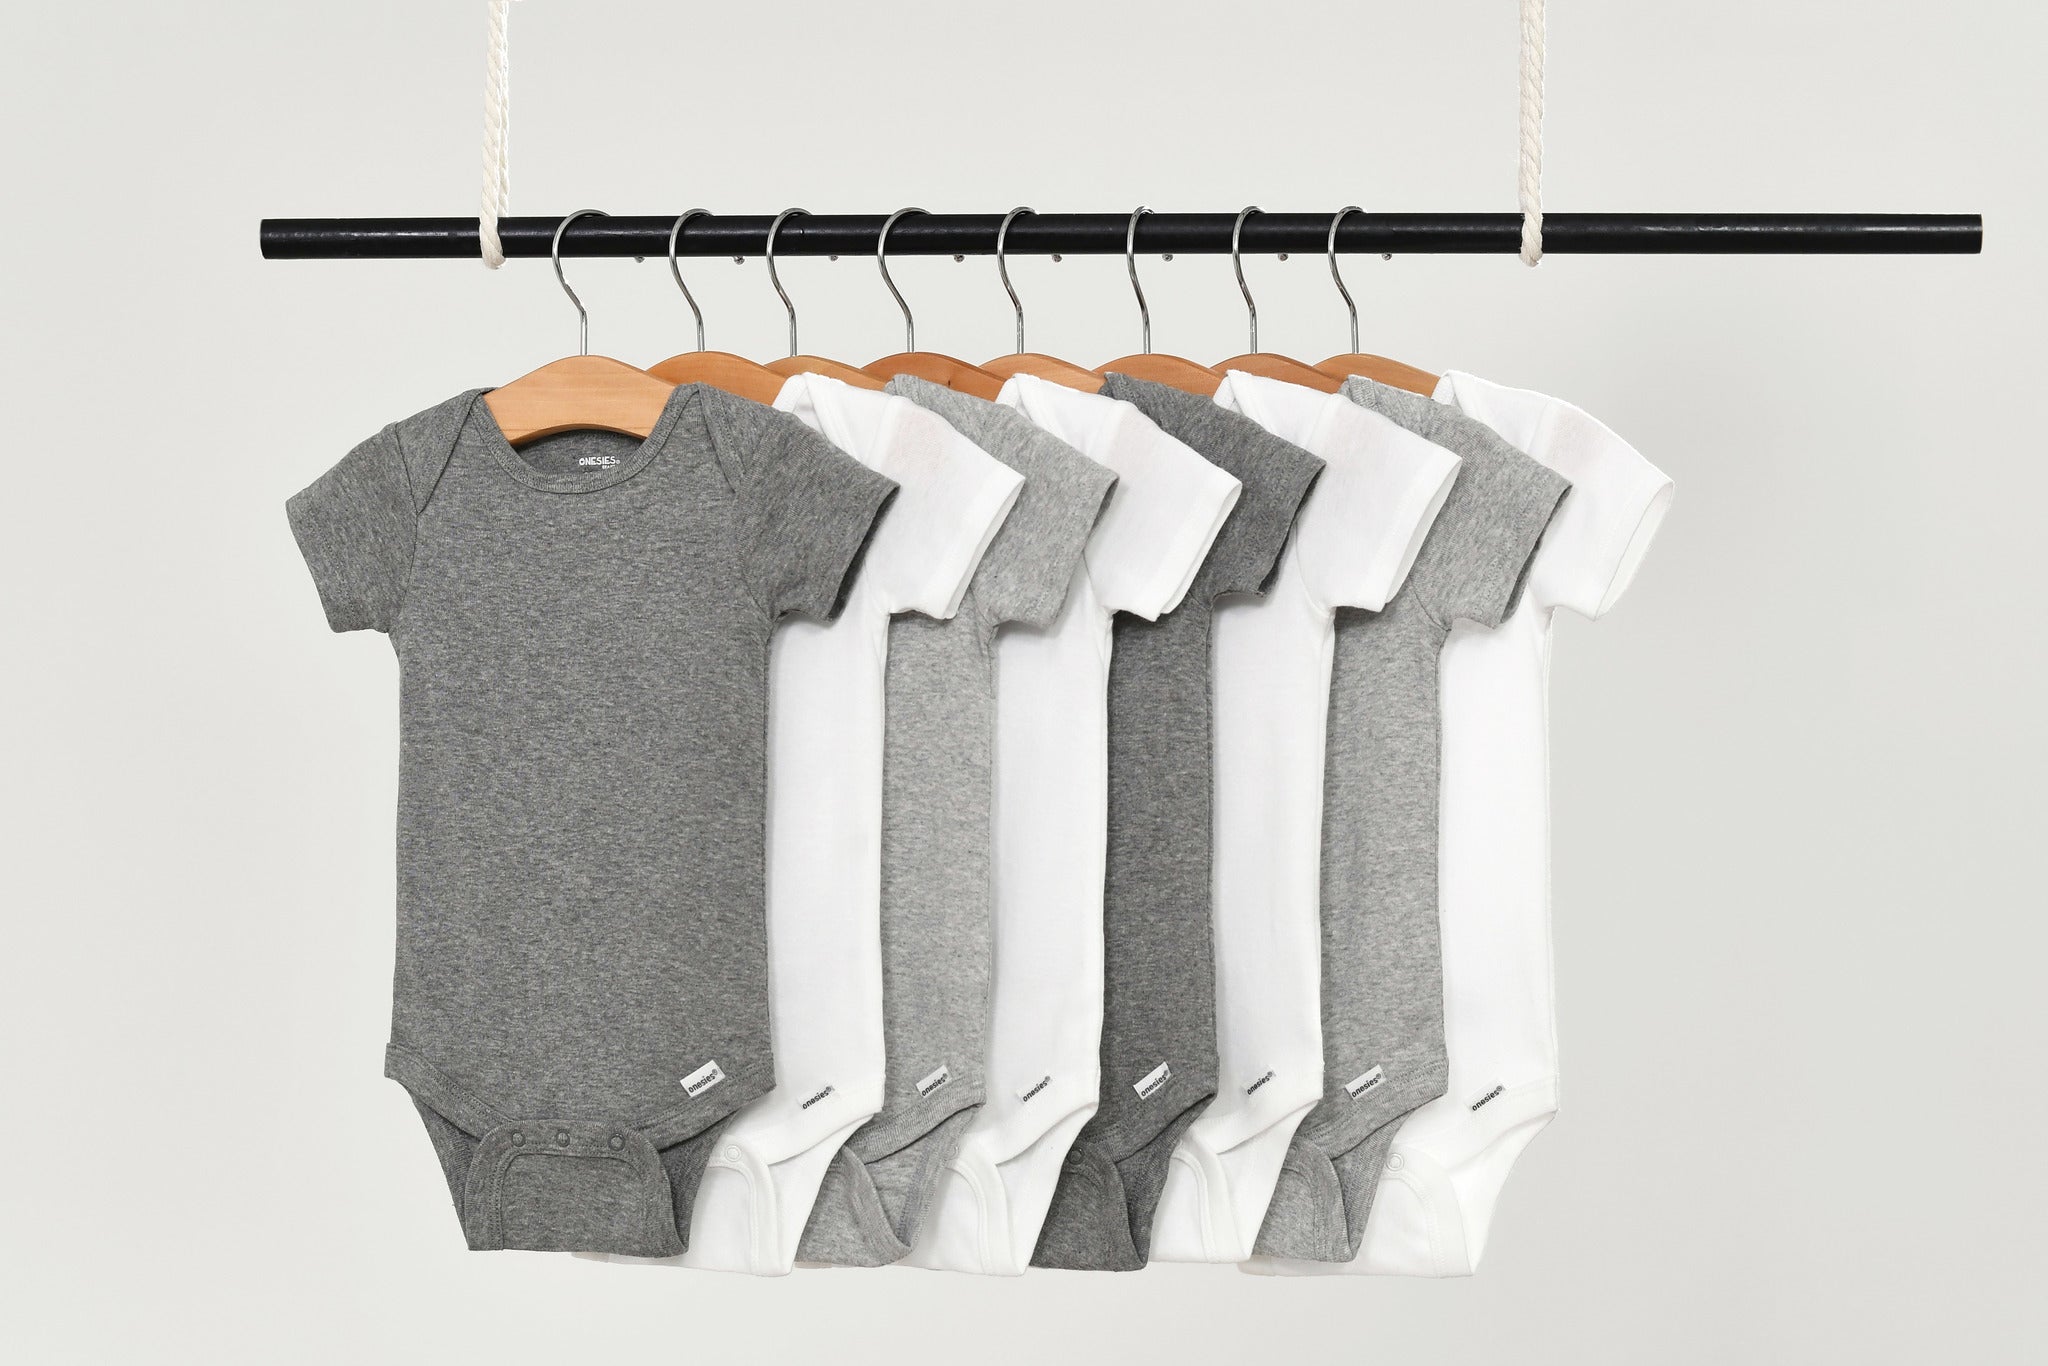 Grey and white onesies hanging on a rod.